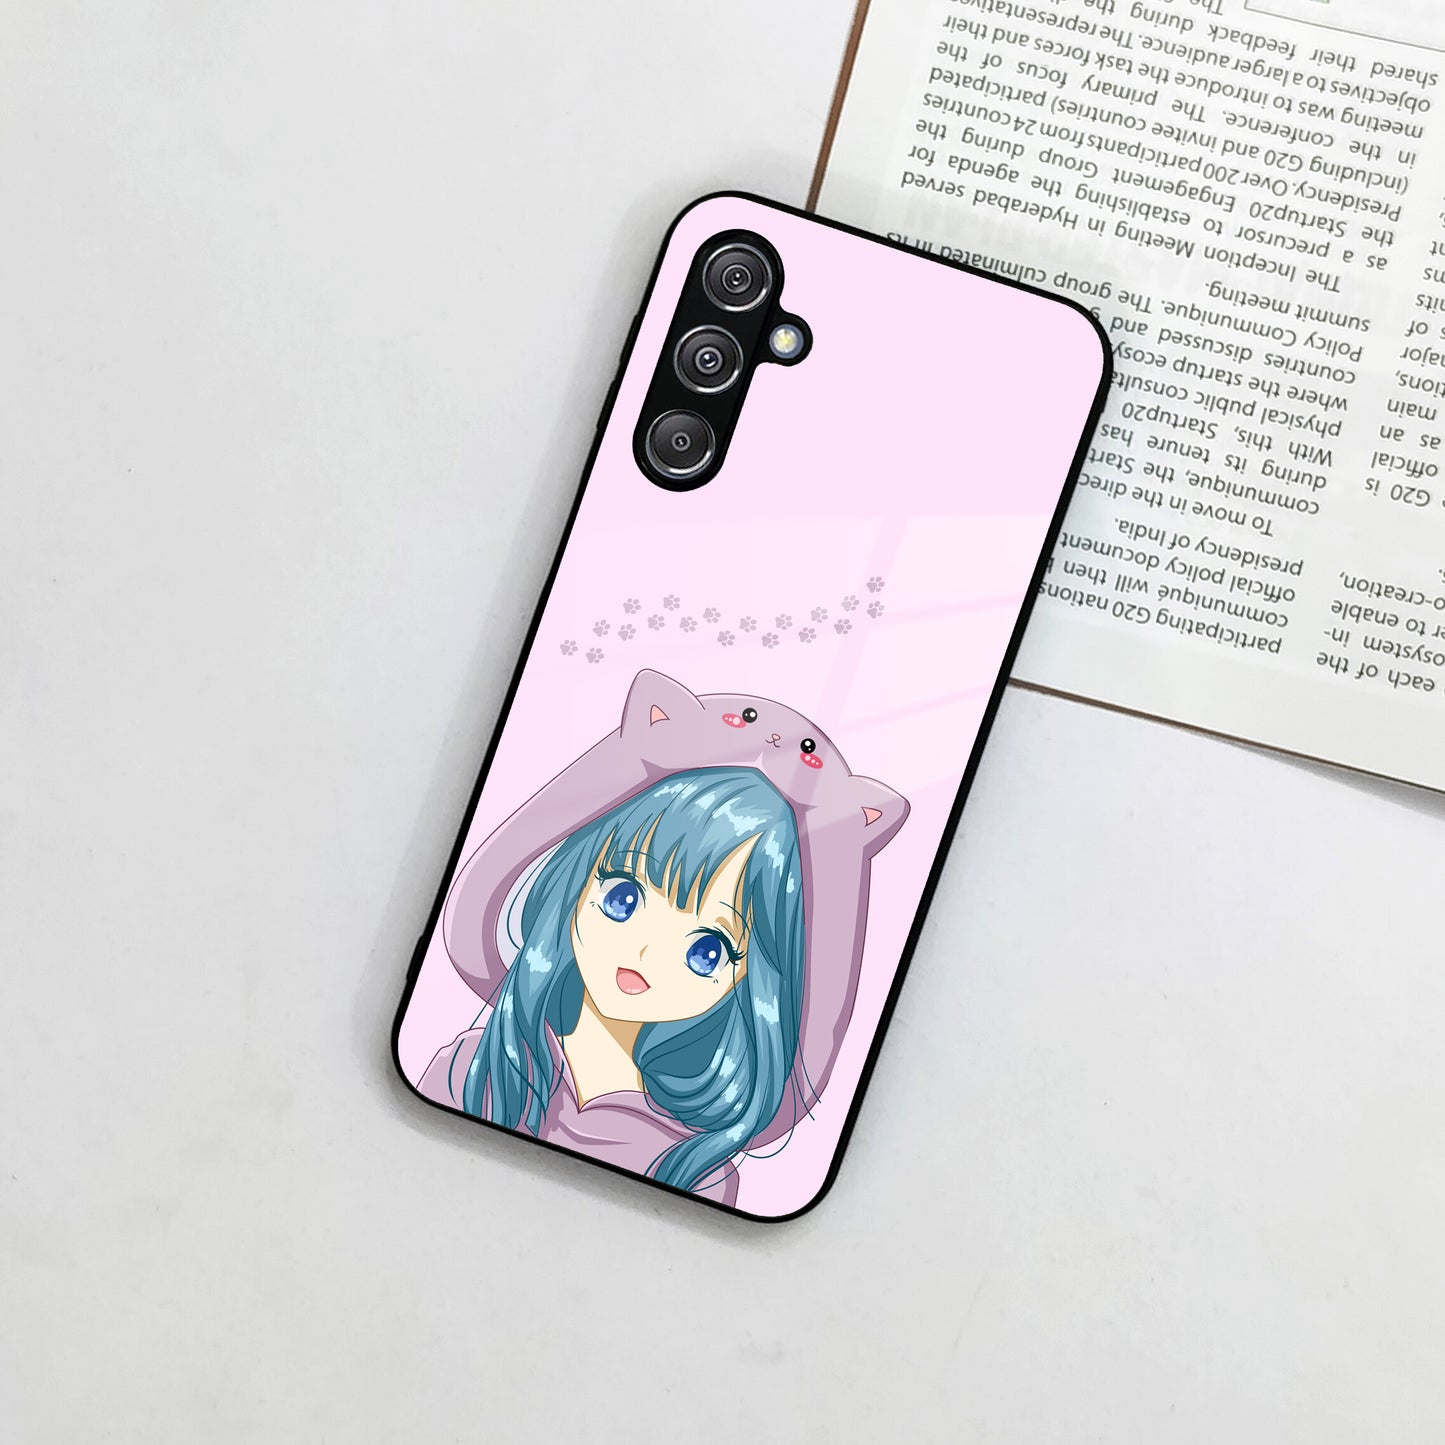 Purple Aesthetic Girl With Cat Phone Glass Case Cover For Samsung